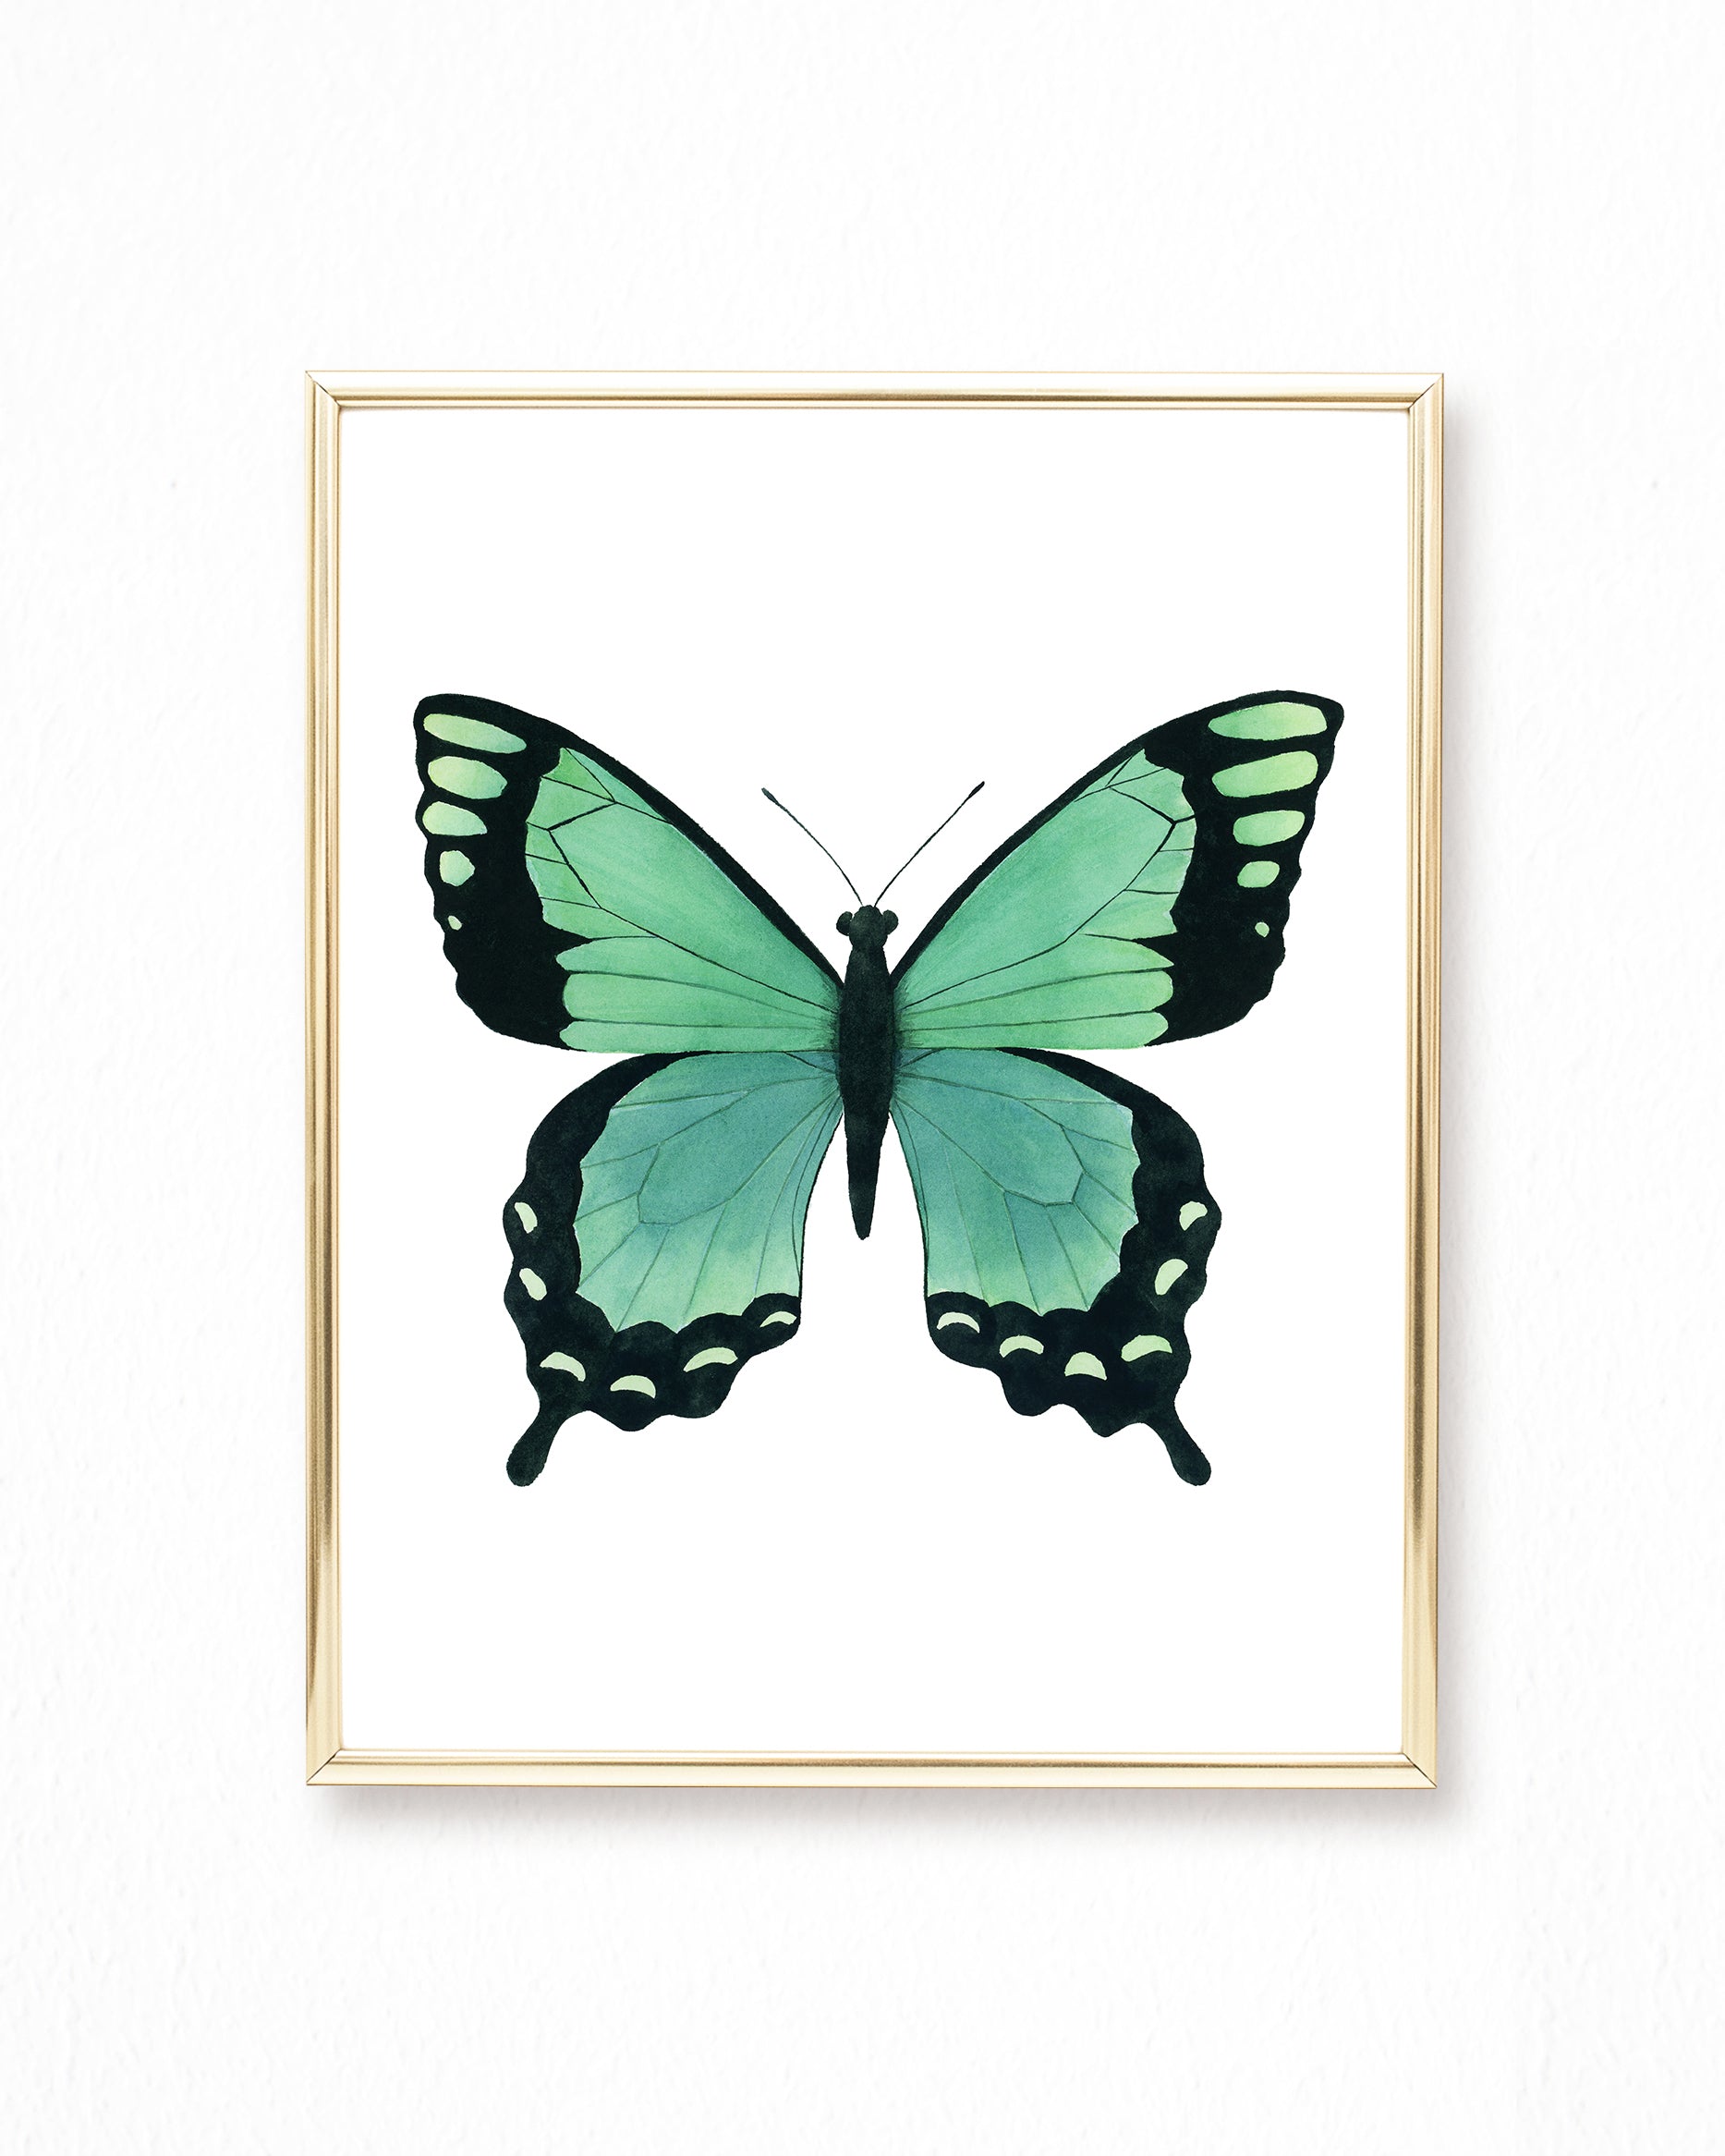 Watercolor Rainbow Butterfly Paintings - Set of 4